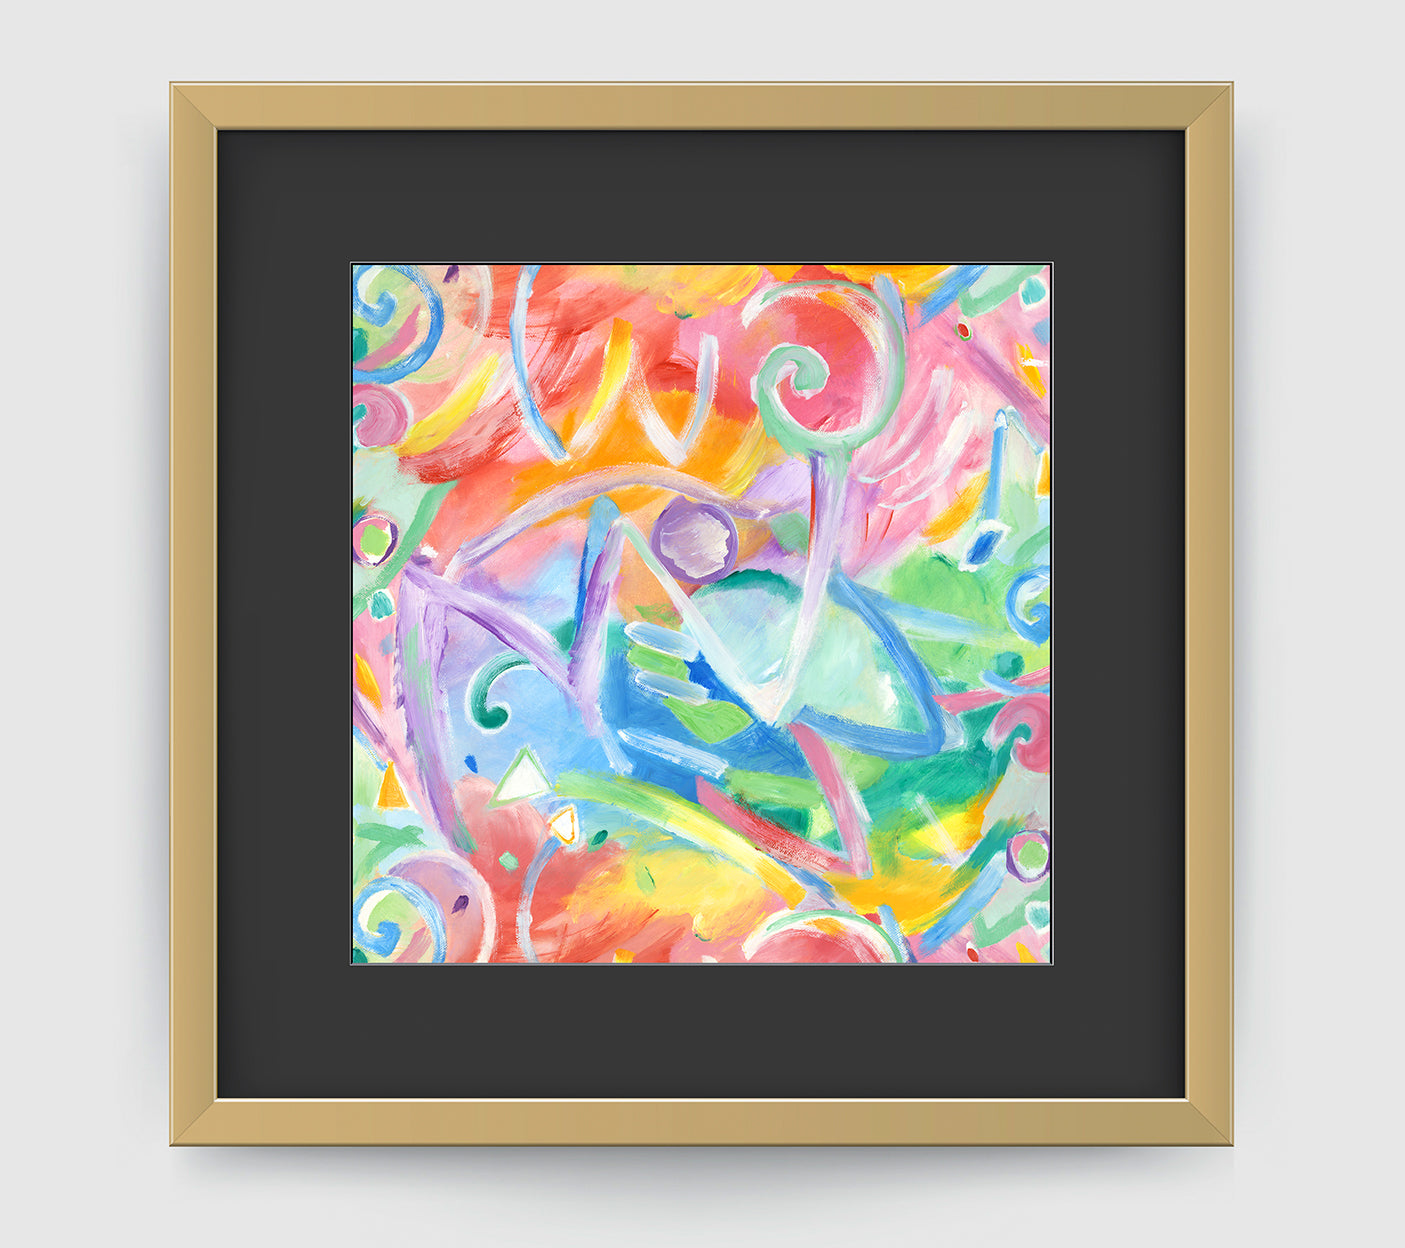 Acrobate Art Print - Abstract Art Wall Decor Collection-Di Lewis